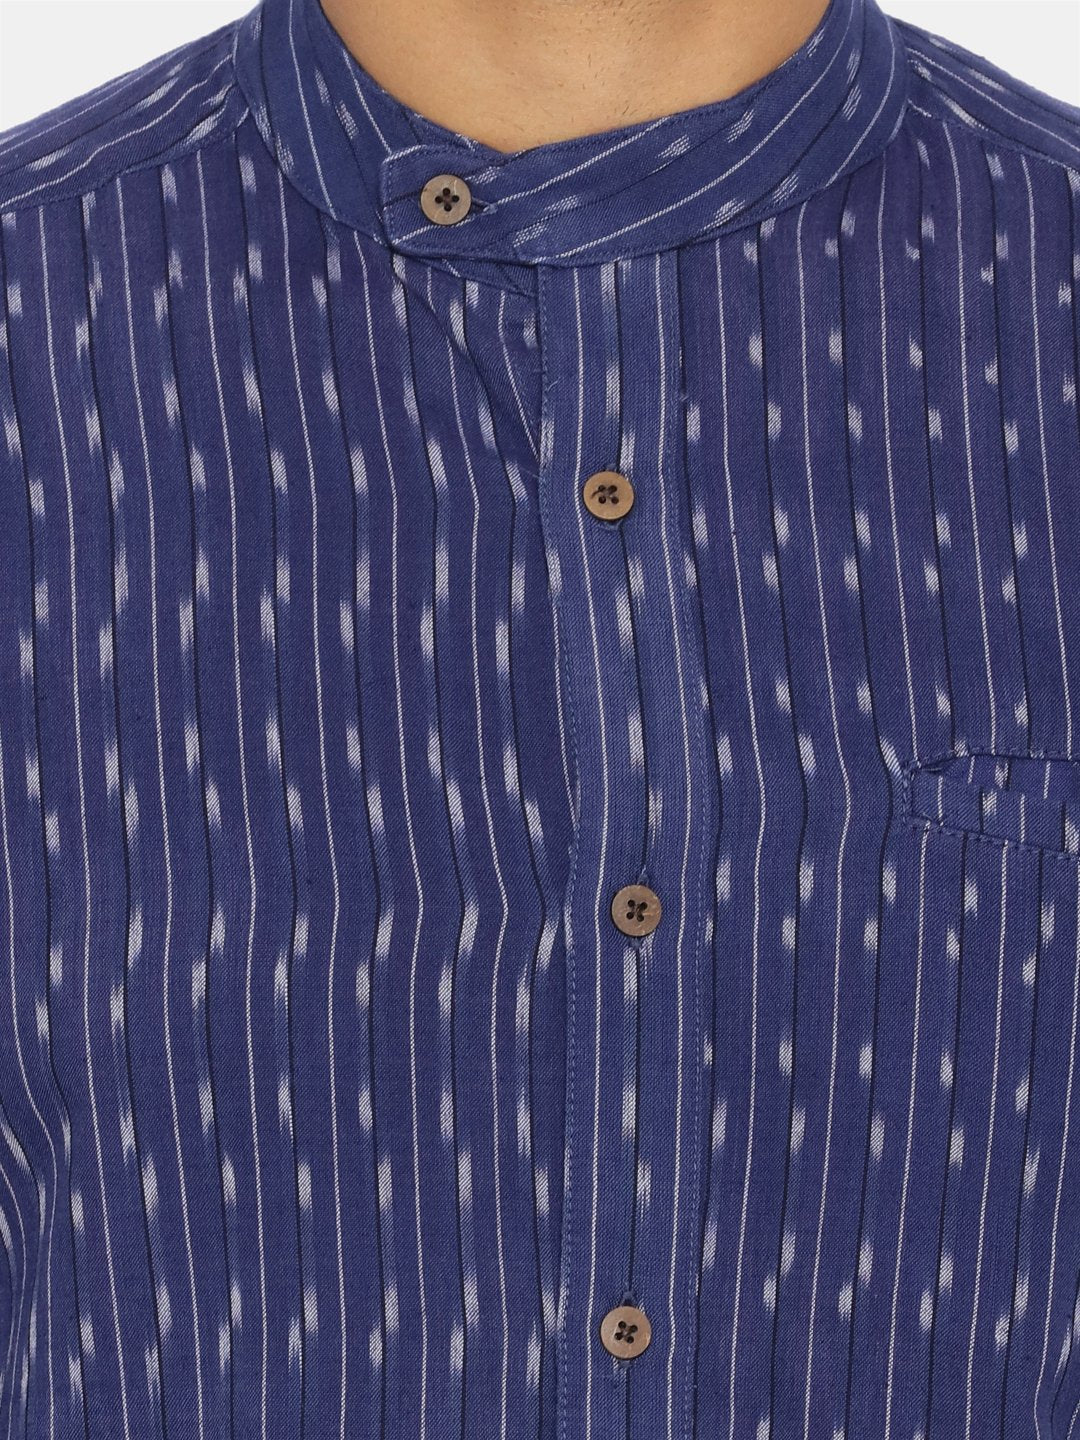 Navy blue extended collared shirt